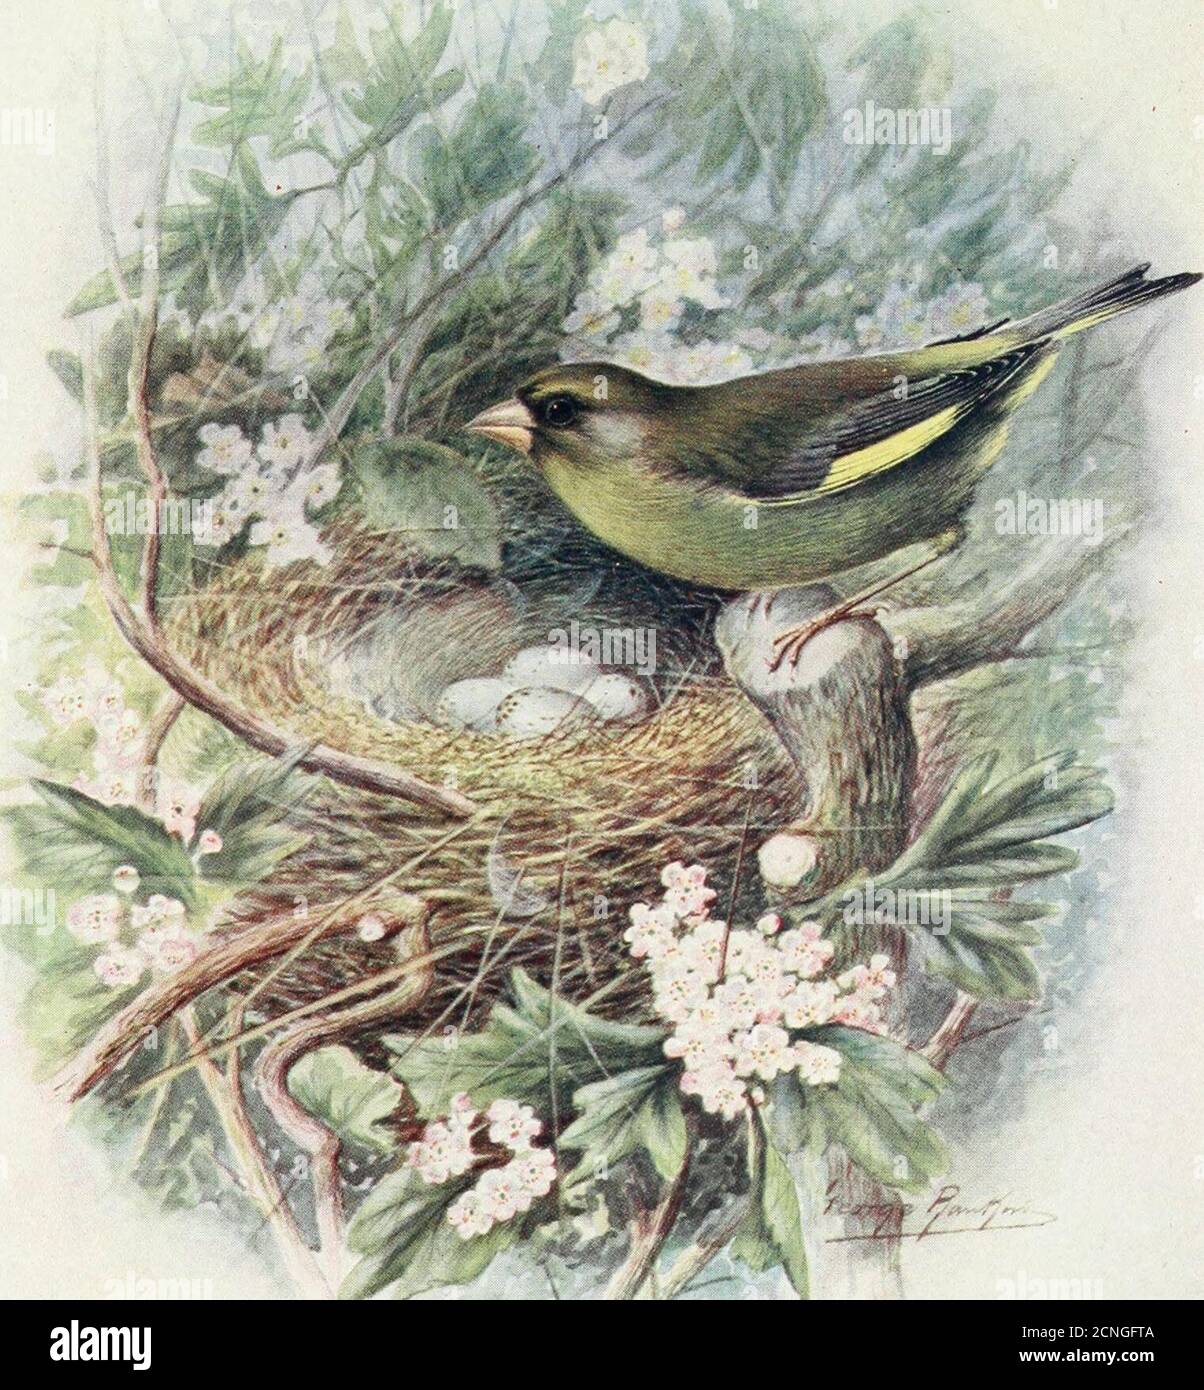 . Britain's birds and their nests . ght on the vexed question of theinheritance of certain migratory habits. The point israther a difficult one to study, because observations aredifficult to obtain. Although the Starling is found to some extentthroughout the year in most districts, the fact that it isa migratory bird is obvious fiom the seasonal variationsin its numbers. In some districts it becomes compara-tively scarce in winter, while in mild regions like thesouth of Ireland its numbers are at that season greatlyaugmented by refugees from the severer weather of otherparts. The British Isles Stock Photo